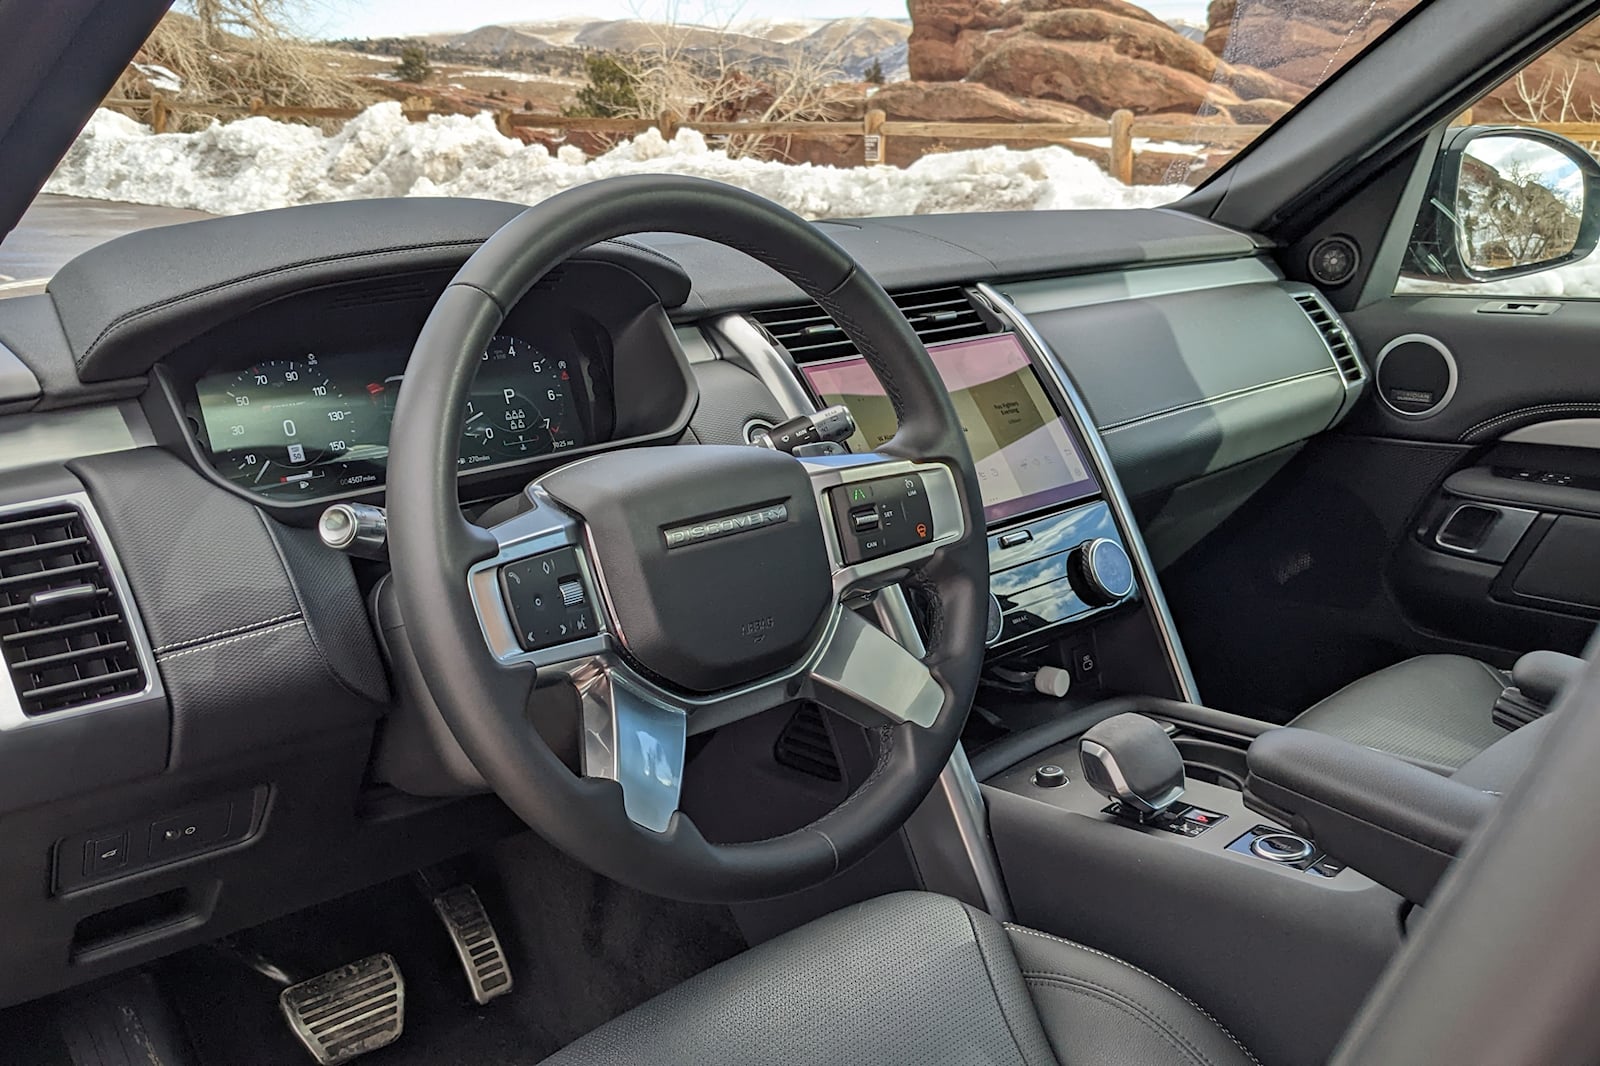 2022 Land Rover Discovery Dashboard